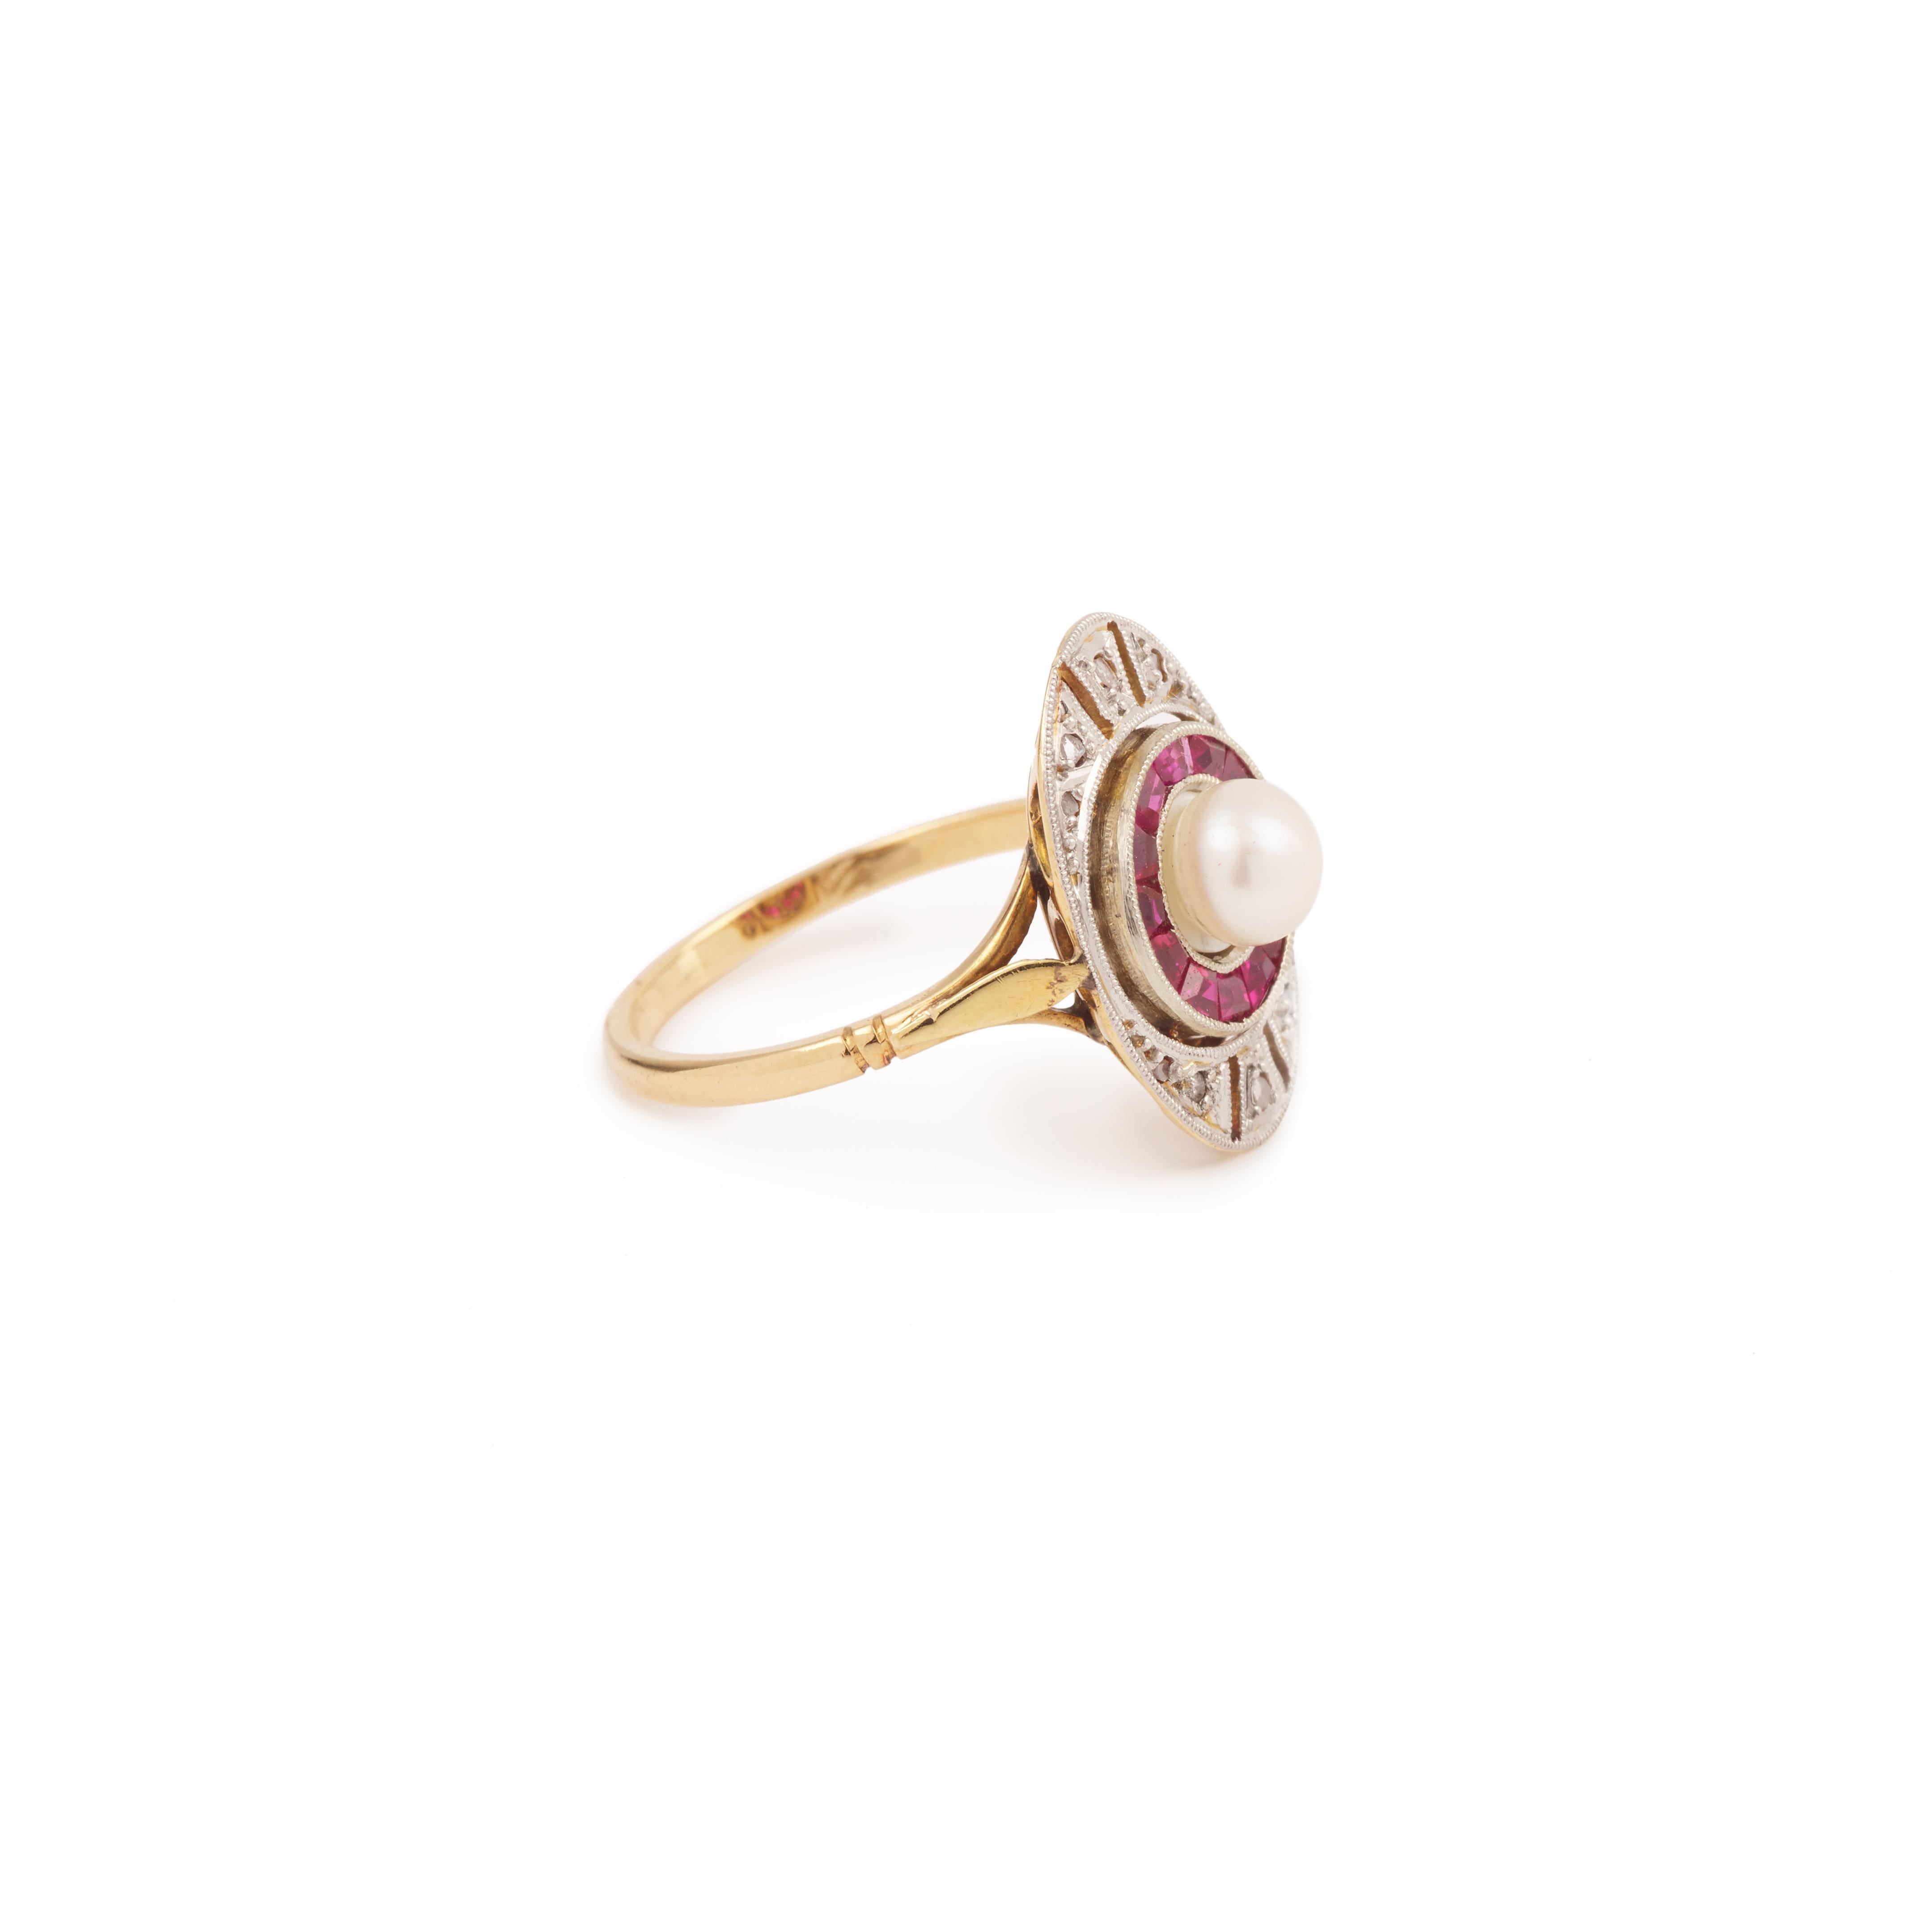 A fine and delicate gold and platinum art deco ring.

Set with a pearl, rubies and diamonds.

Dimensions of the marquise: 17 x 11.5 mm

Finger size: 52 (US: 6)

18-carat yellow gold, 750 / 000th (Eagle’s head hallmark)

France, circa 1930